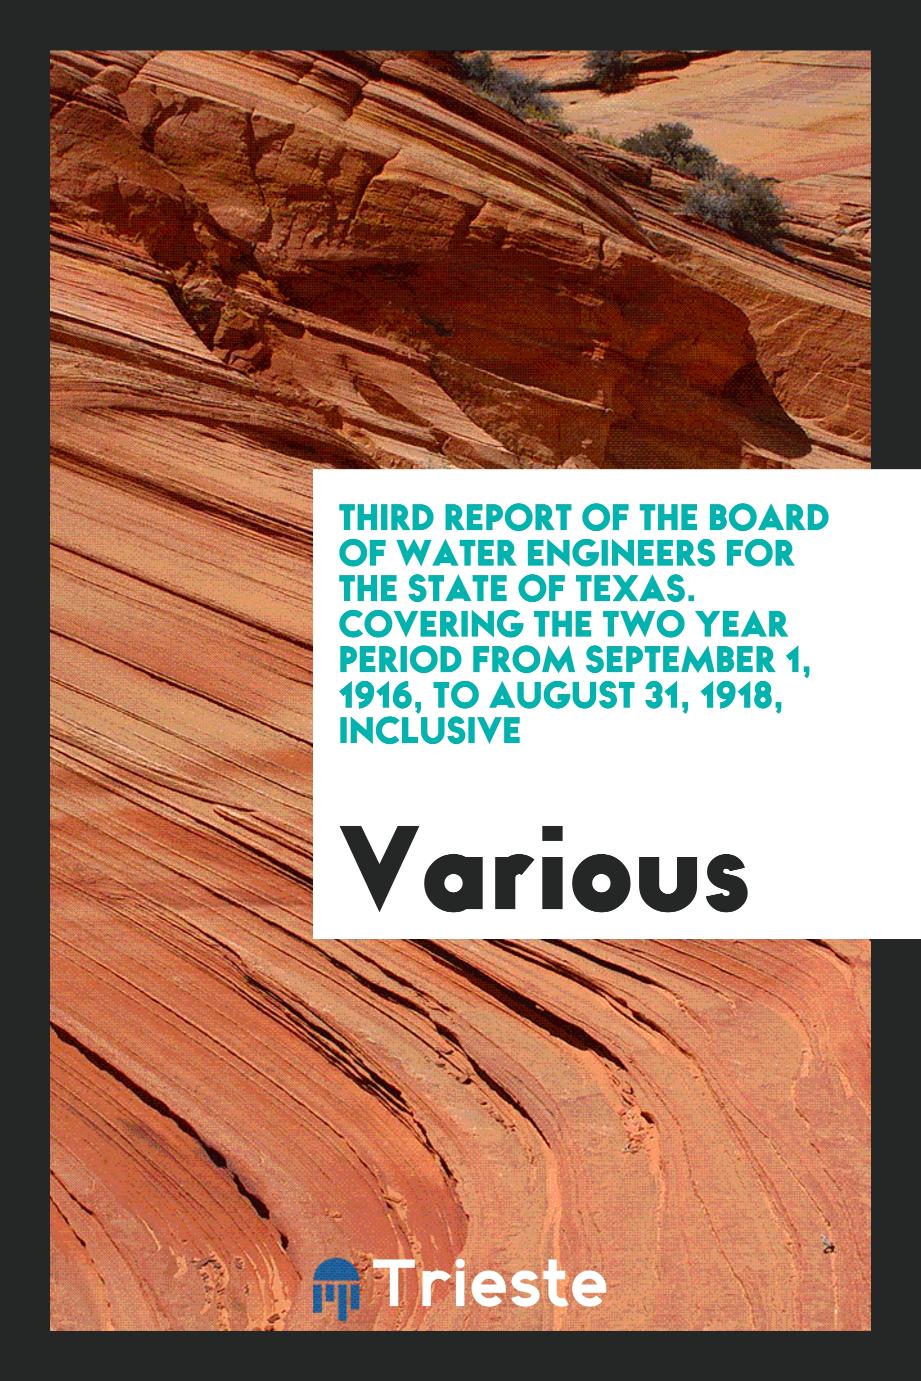 Third Report of the Board of Water Engineers for the State of Texas. Covering the two Year Period from September 1, 1916, to August 31, 1918, Inclusive